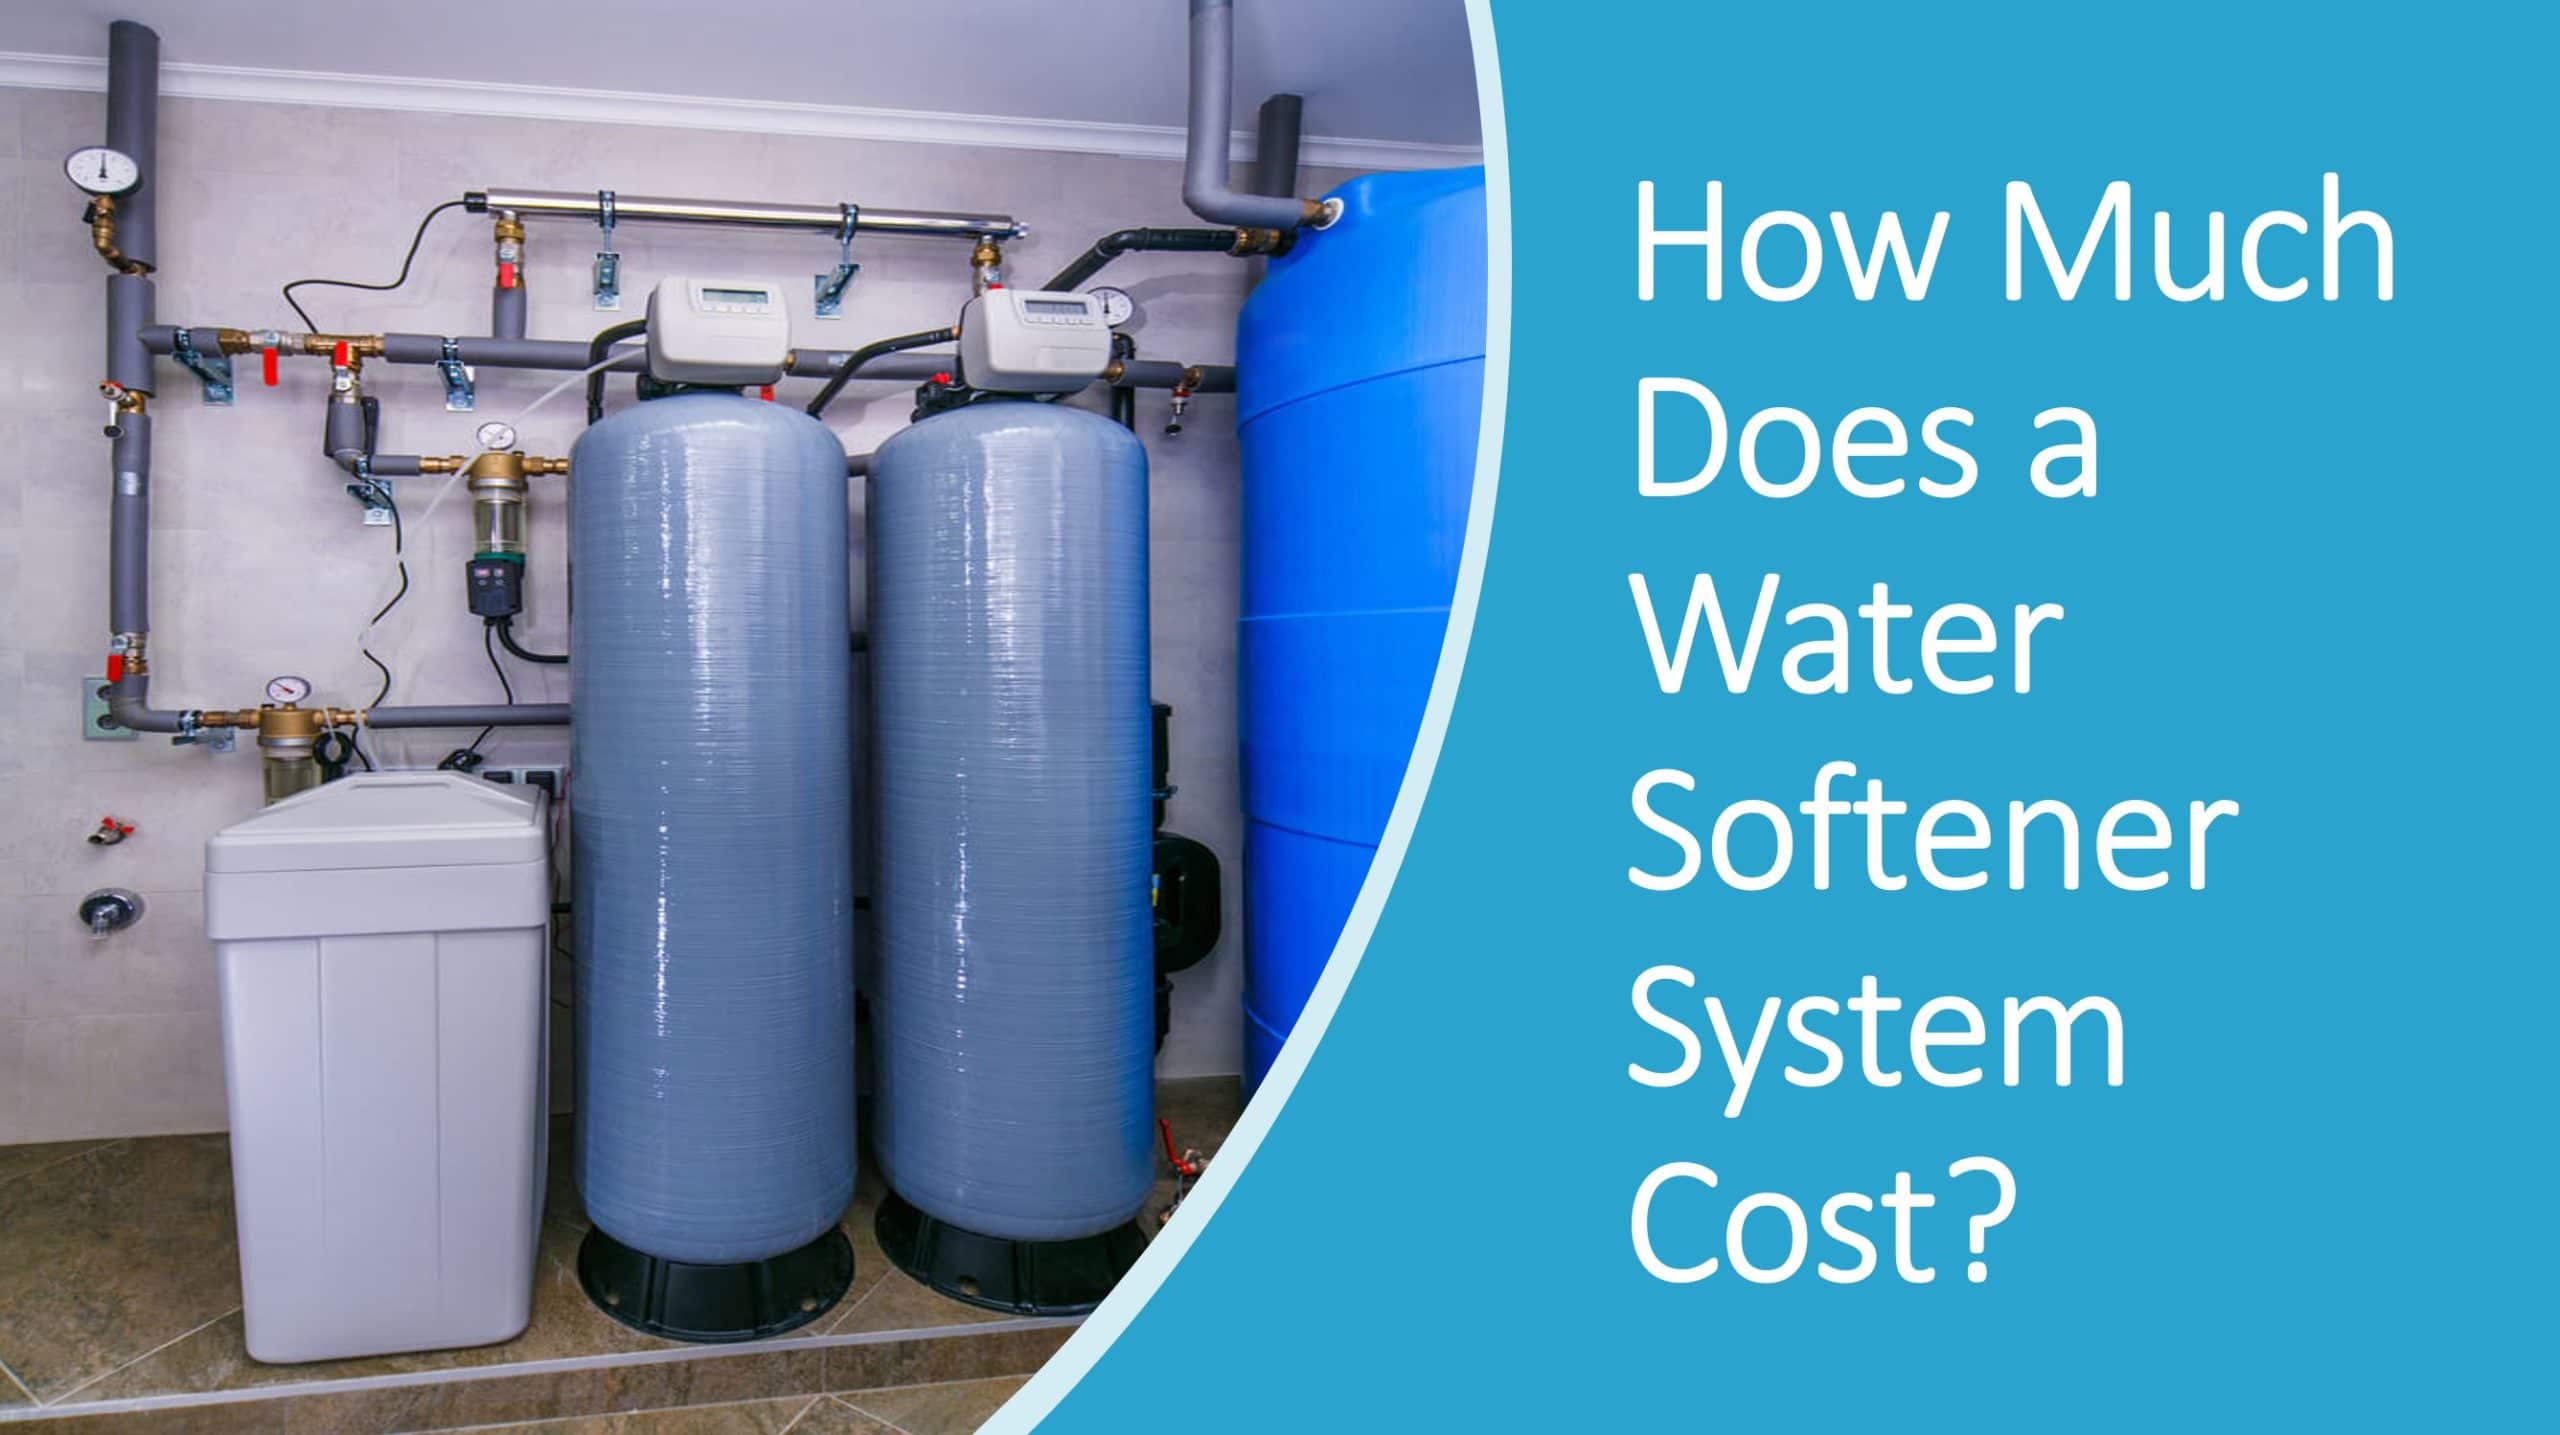 The Cost of Owning a Water Softener